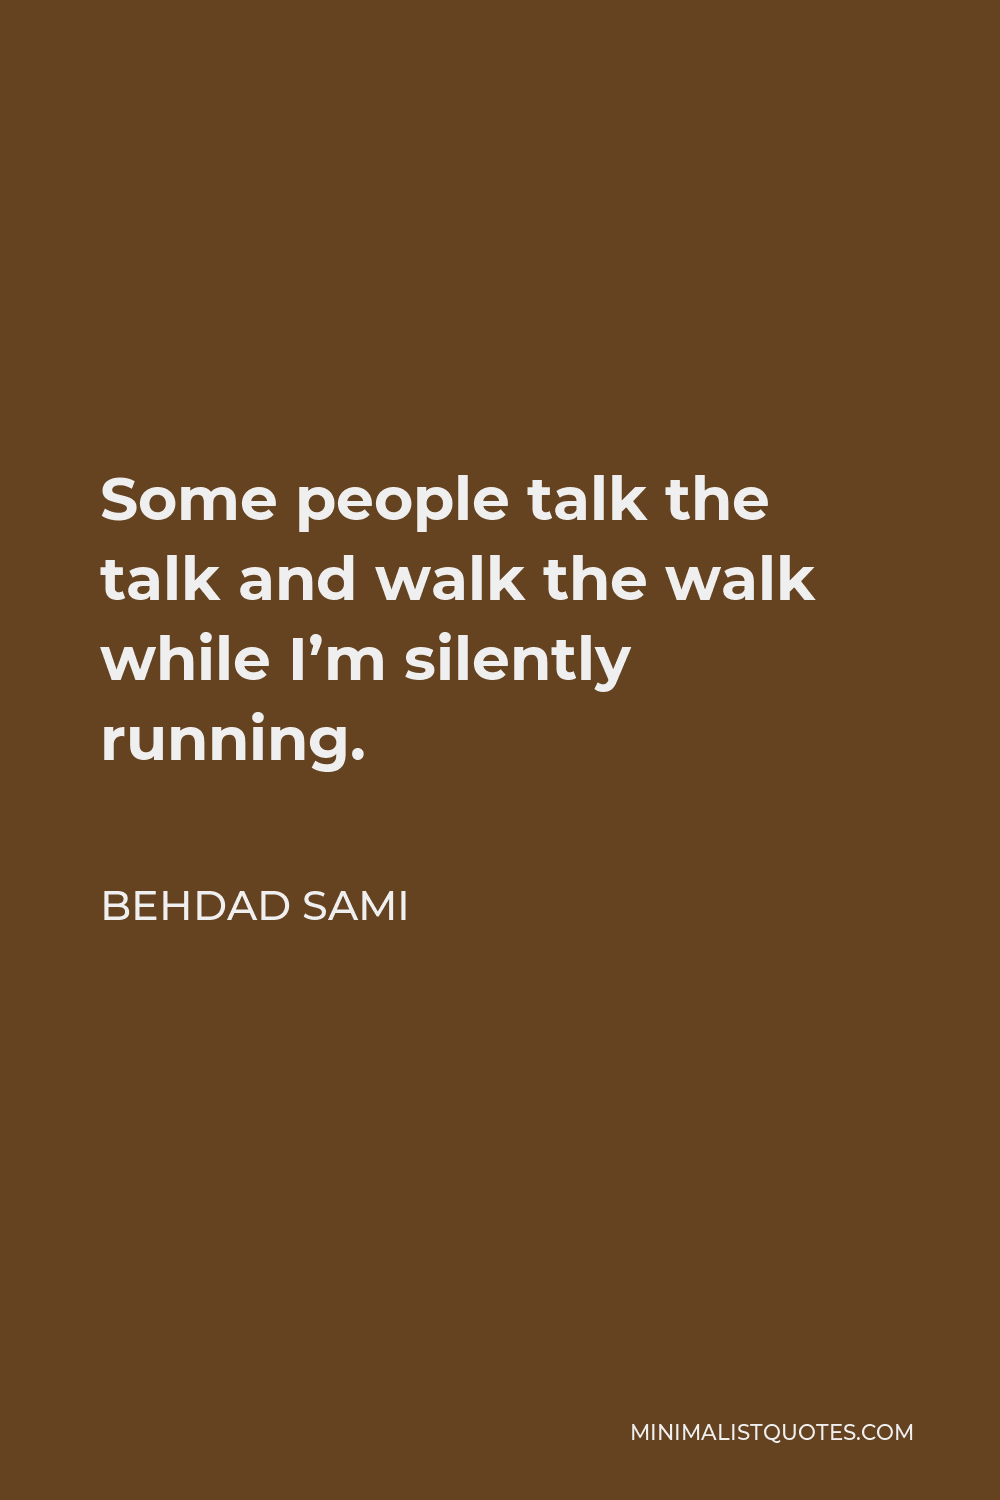 Behdad Sami Quote - Some people talk the talk and walk the walk while I’m silently running.